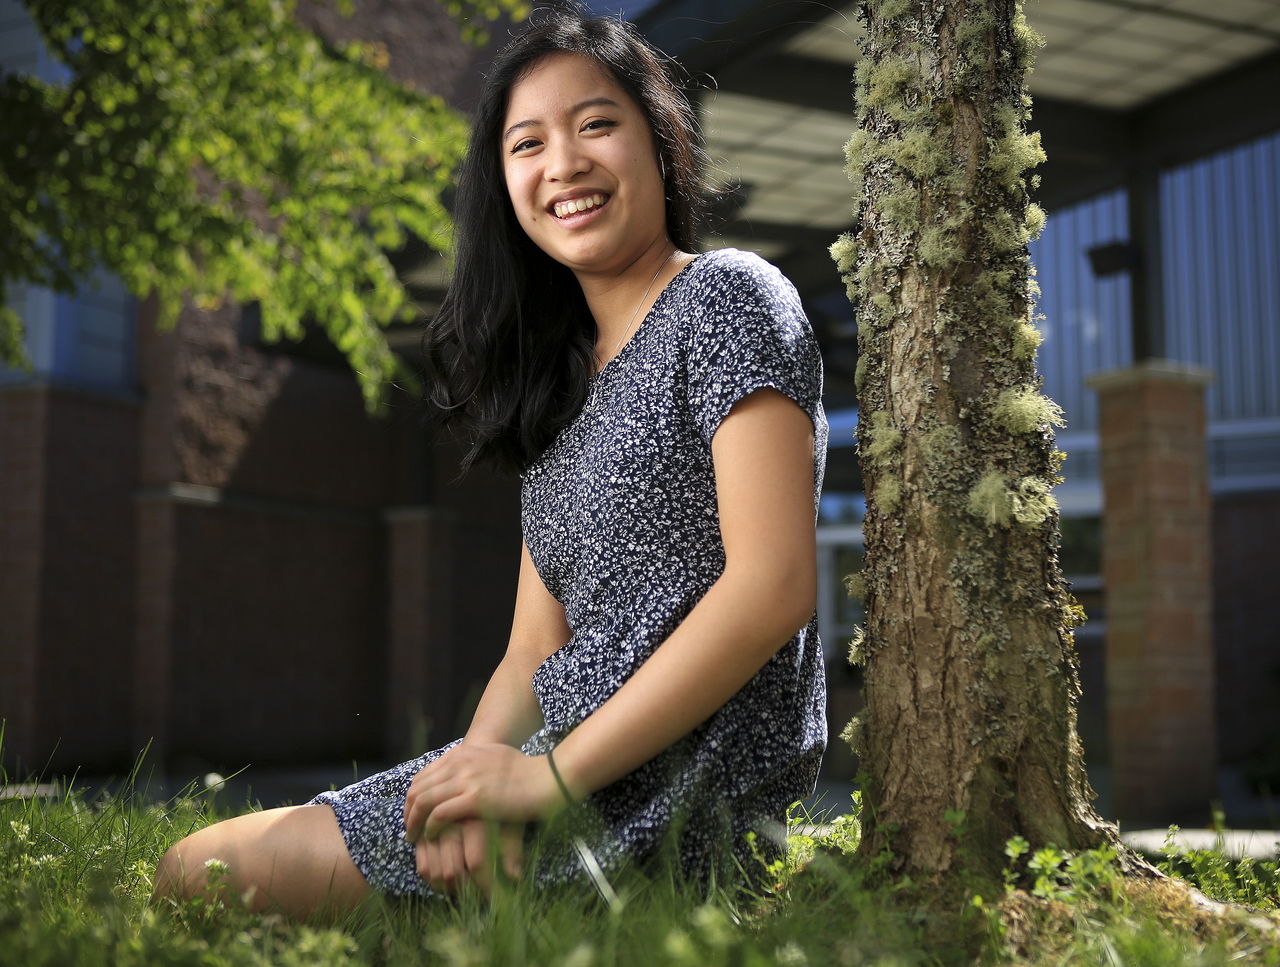 Meadowdale student is passionate about the environment